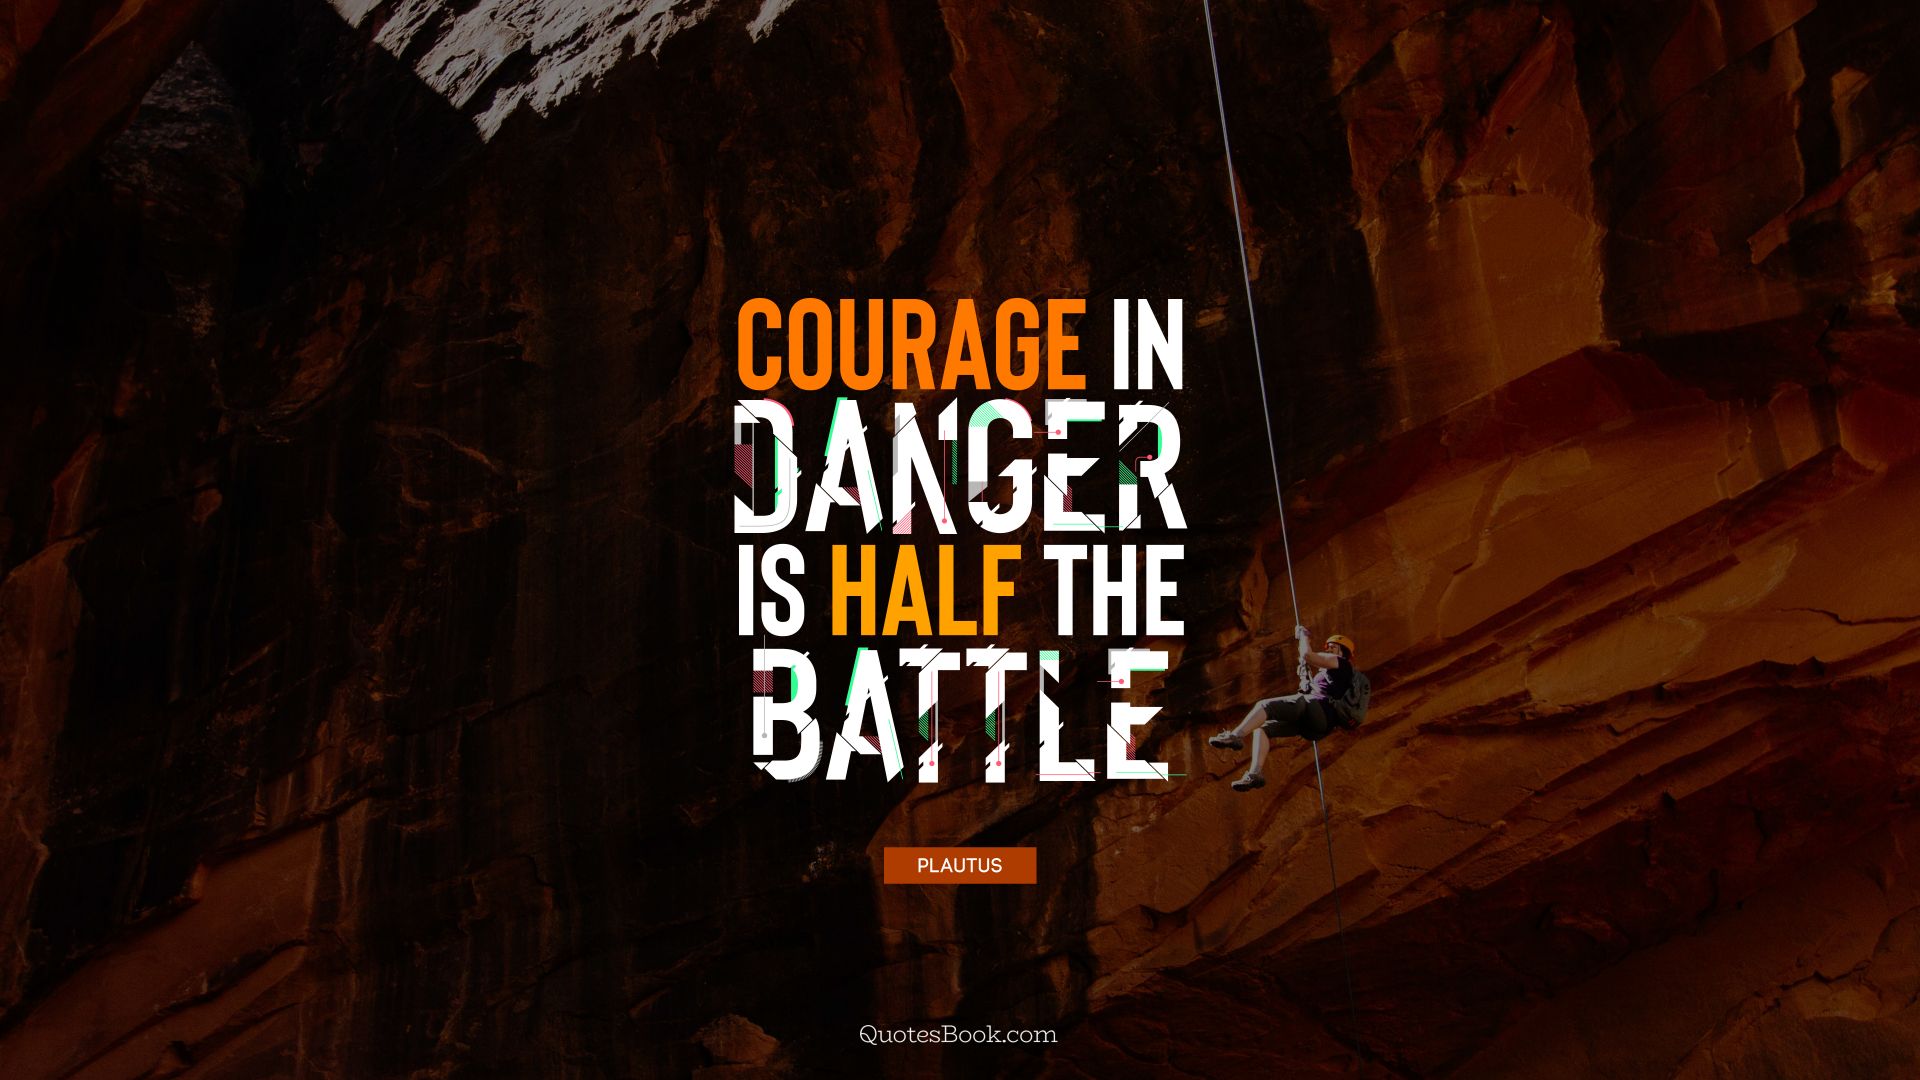 Courage in danger is half the battle. - Quote by Plautus